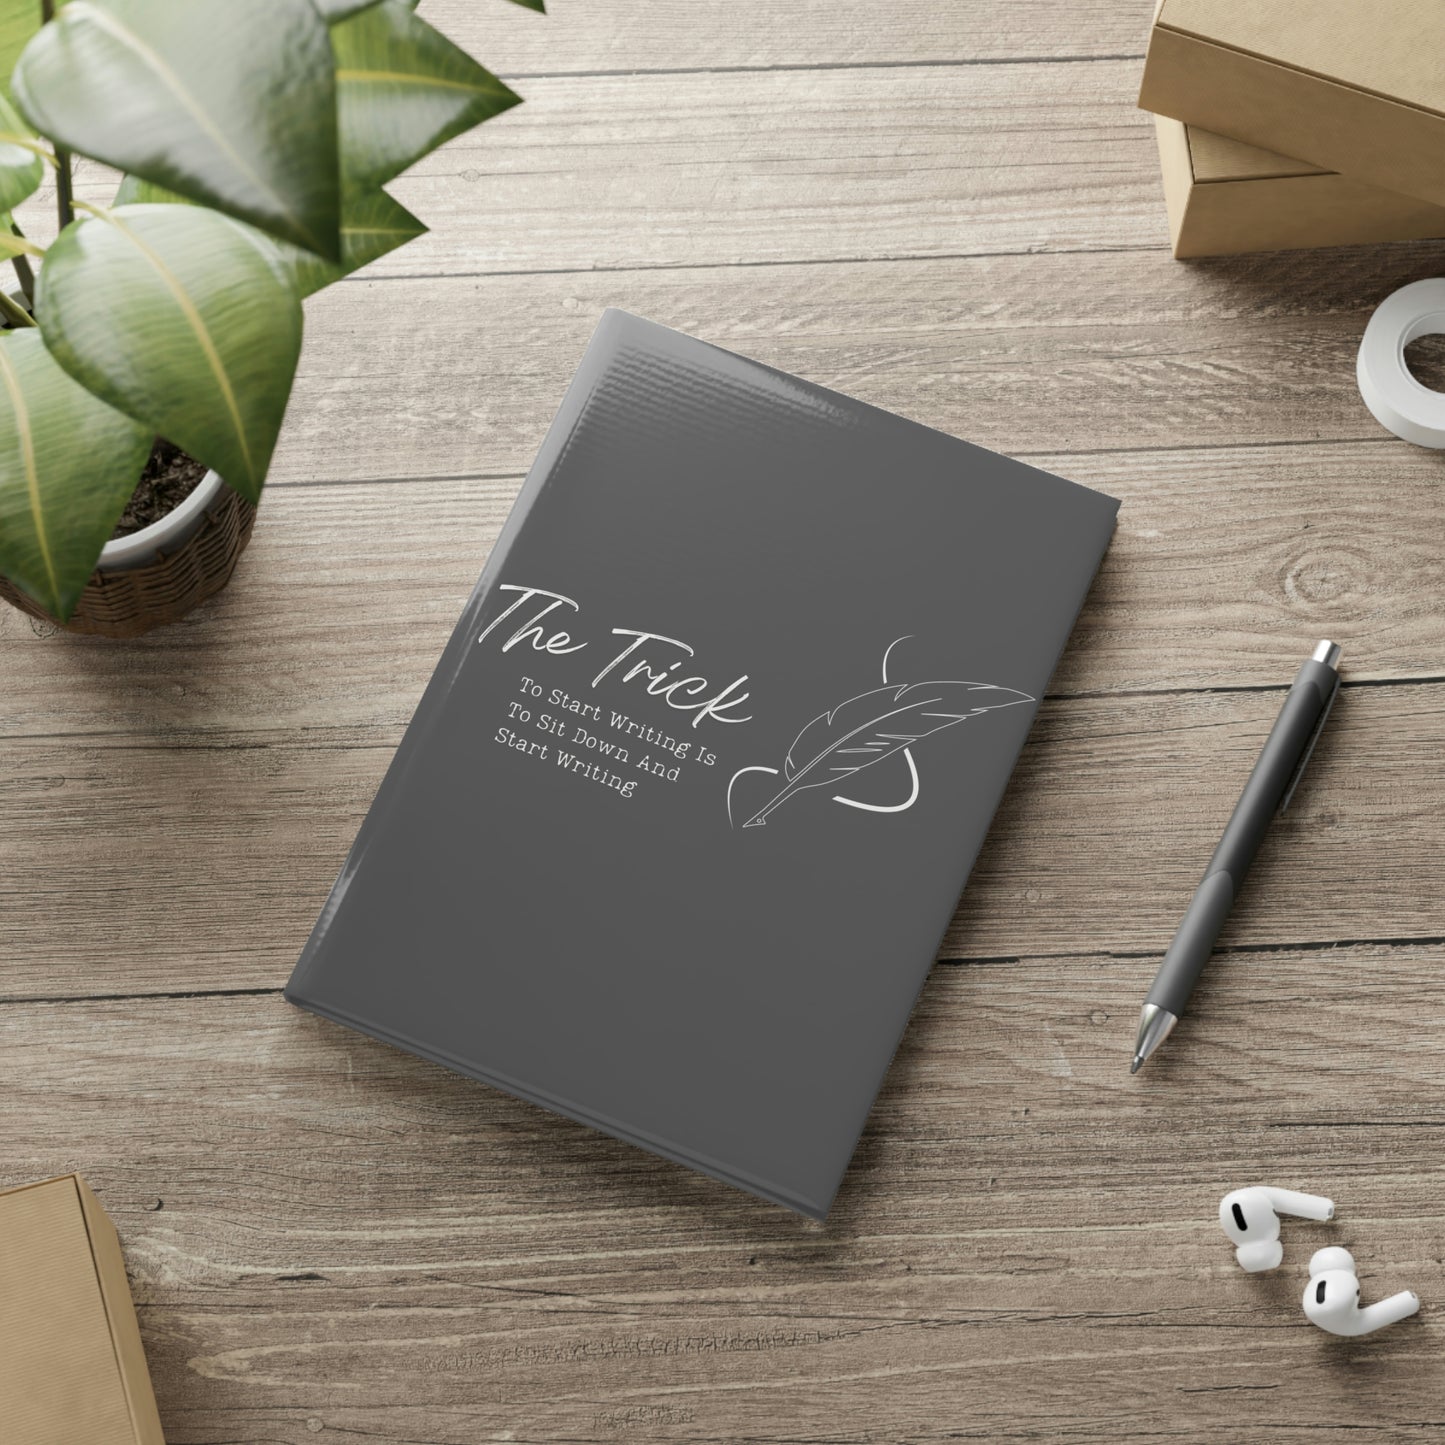 Hardcover Notebook with Puffy Covers (Gray) // The trick to getting started is to get started // Write Out Loud